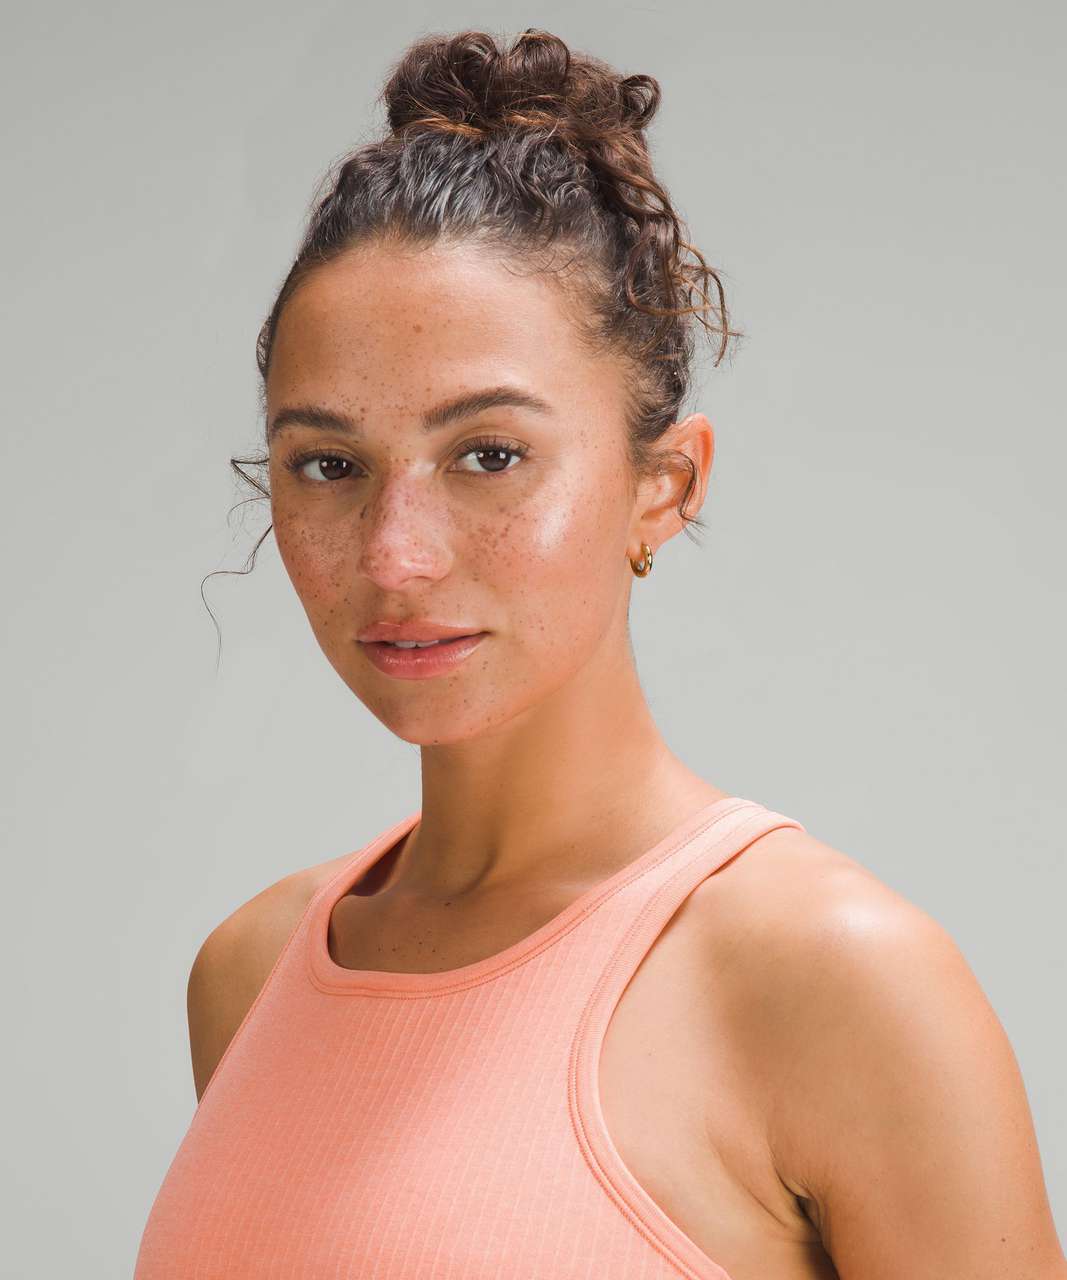 Lululemon Ebb to Street Cropped Racerback Tank Top - Sunny Coral